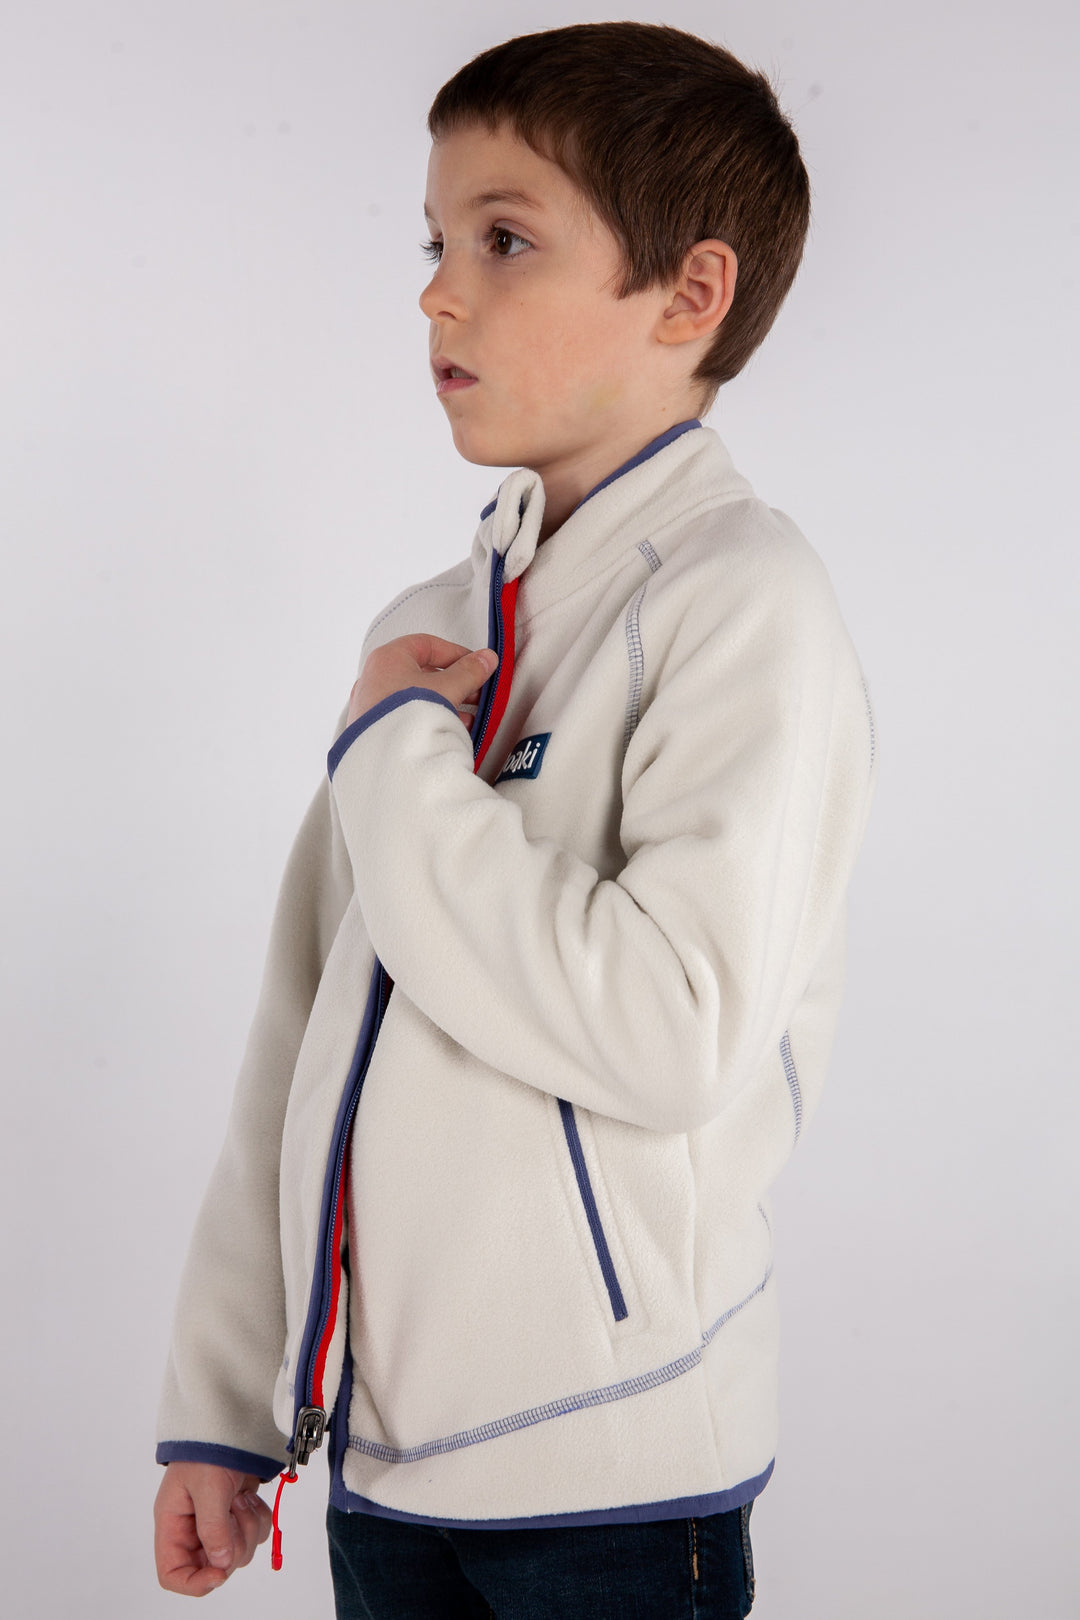 OAKI 200 Series Polartec Fleece Jacket in Oatmeal White (Sizing Runs Small, Recommend Sizing Up)